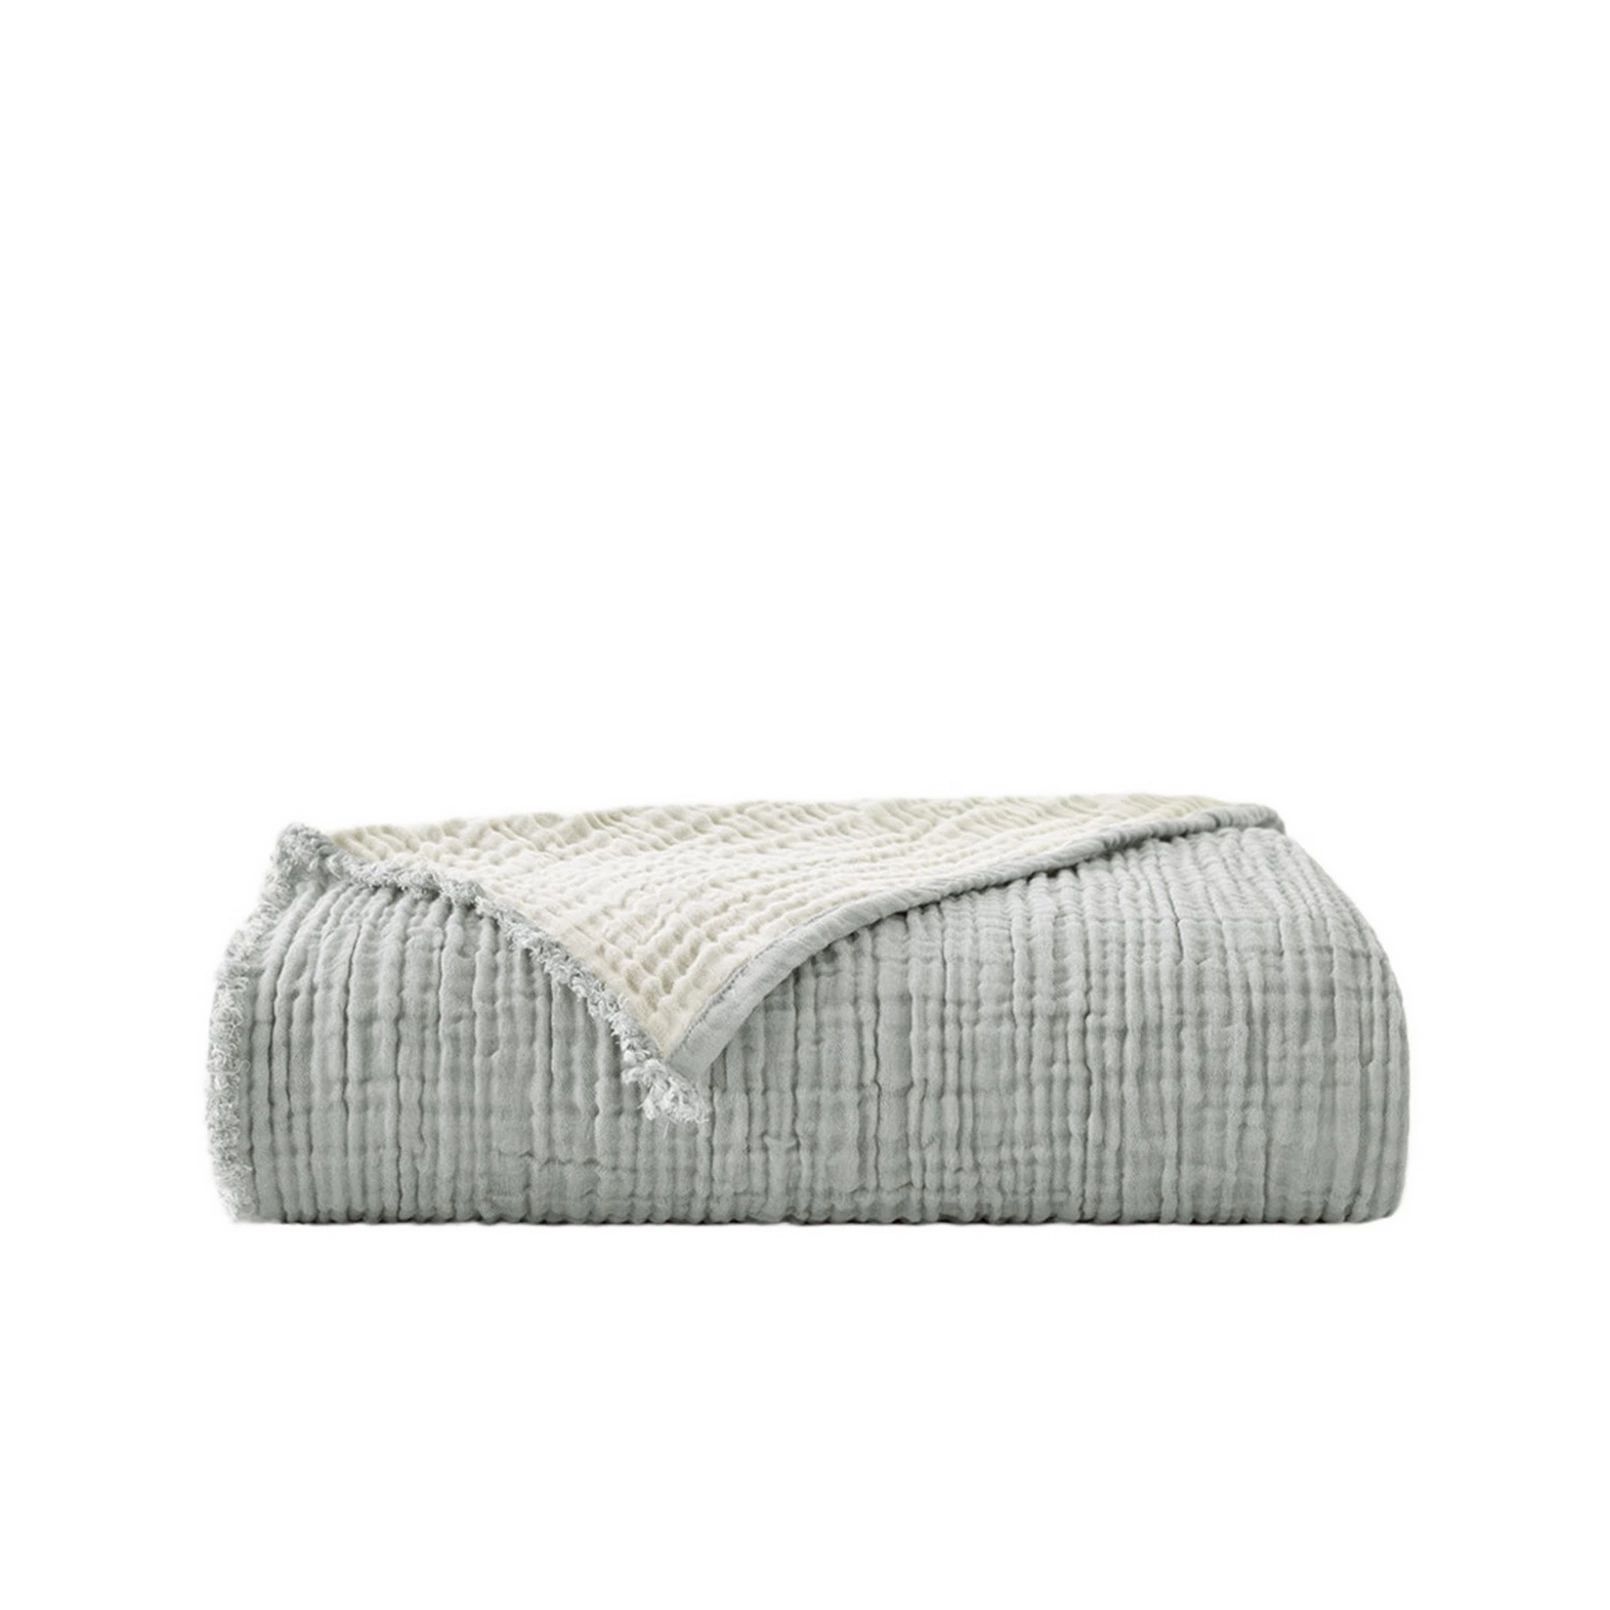 Truly Soft Two-Toned Throw Blanket | Kohl's